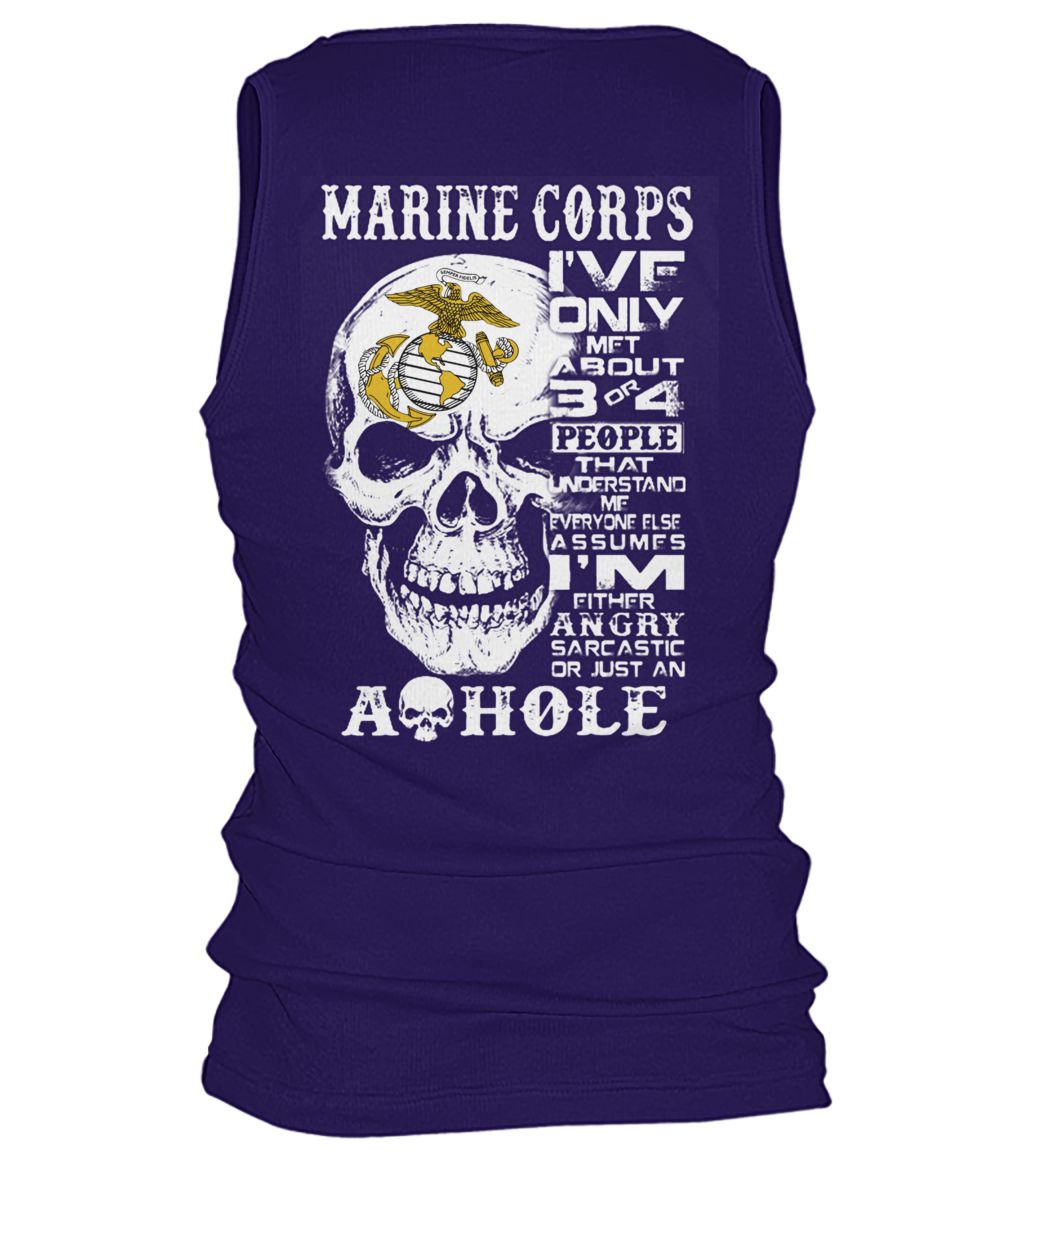 Marine corps I've only met about 3 or 4 people that understand me skull men's tank top